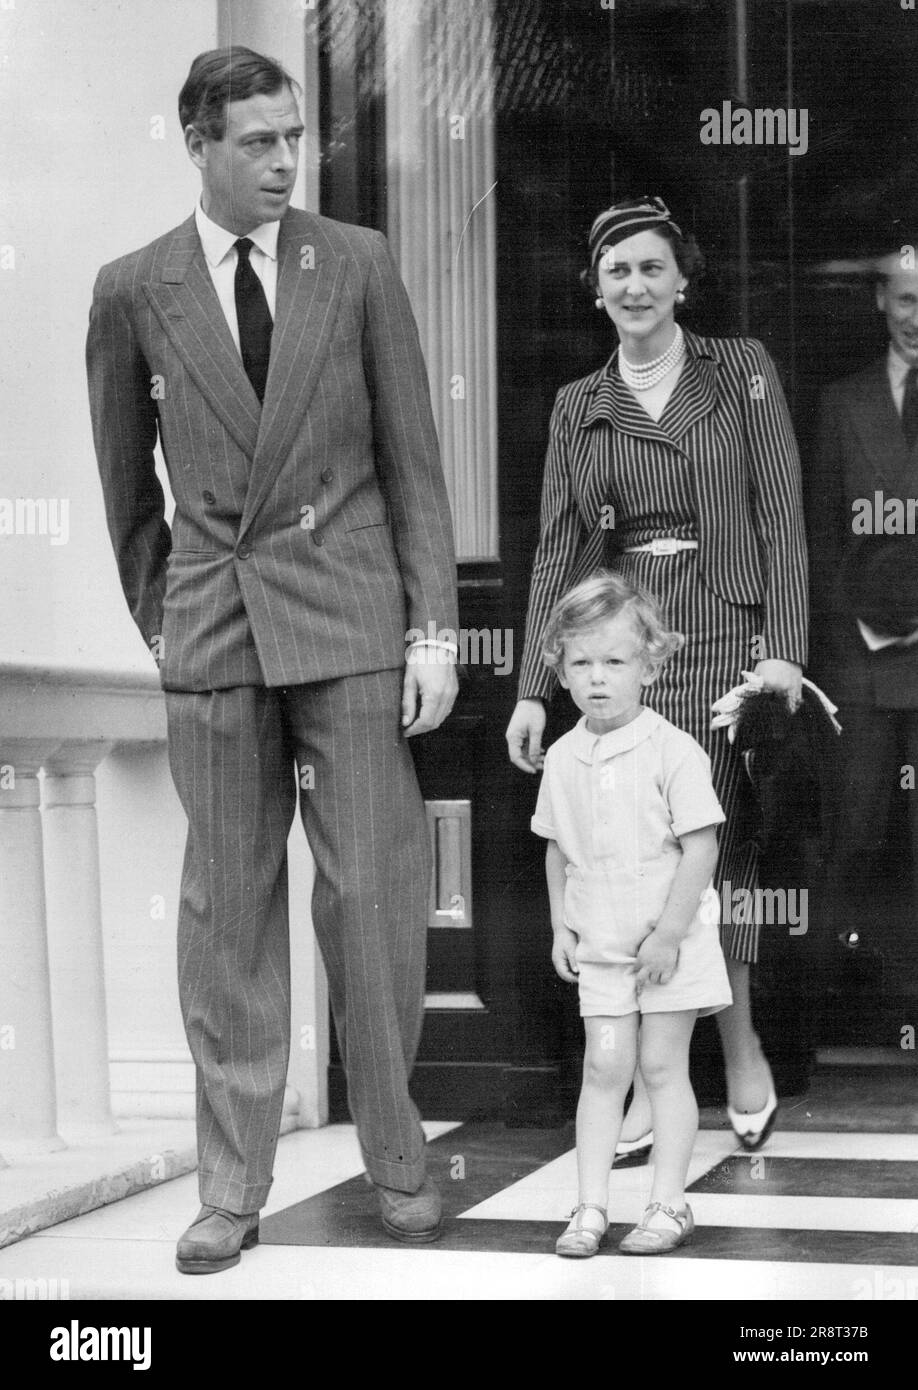 The Duchess Of Kent Leave ***** Of Queen Marie - The Duke and Duchess of Kent flew from Hendon this to Vienna, to take the train from there to Bucharest no the funeral of Queen Marie of Rumania. The Duke and Duchess of Kent photographed with Prince Edward before leaving Belgrave Square this morning. July 24, 1938. (Photo by Keystone). Stock Photo